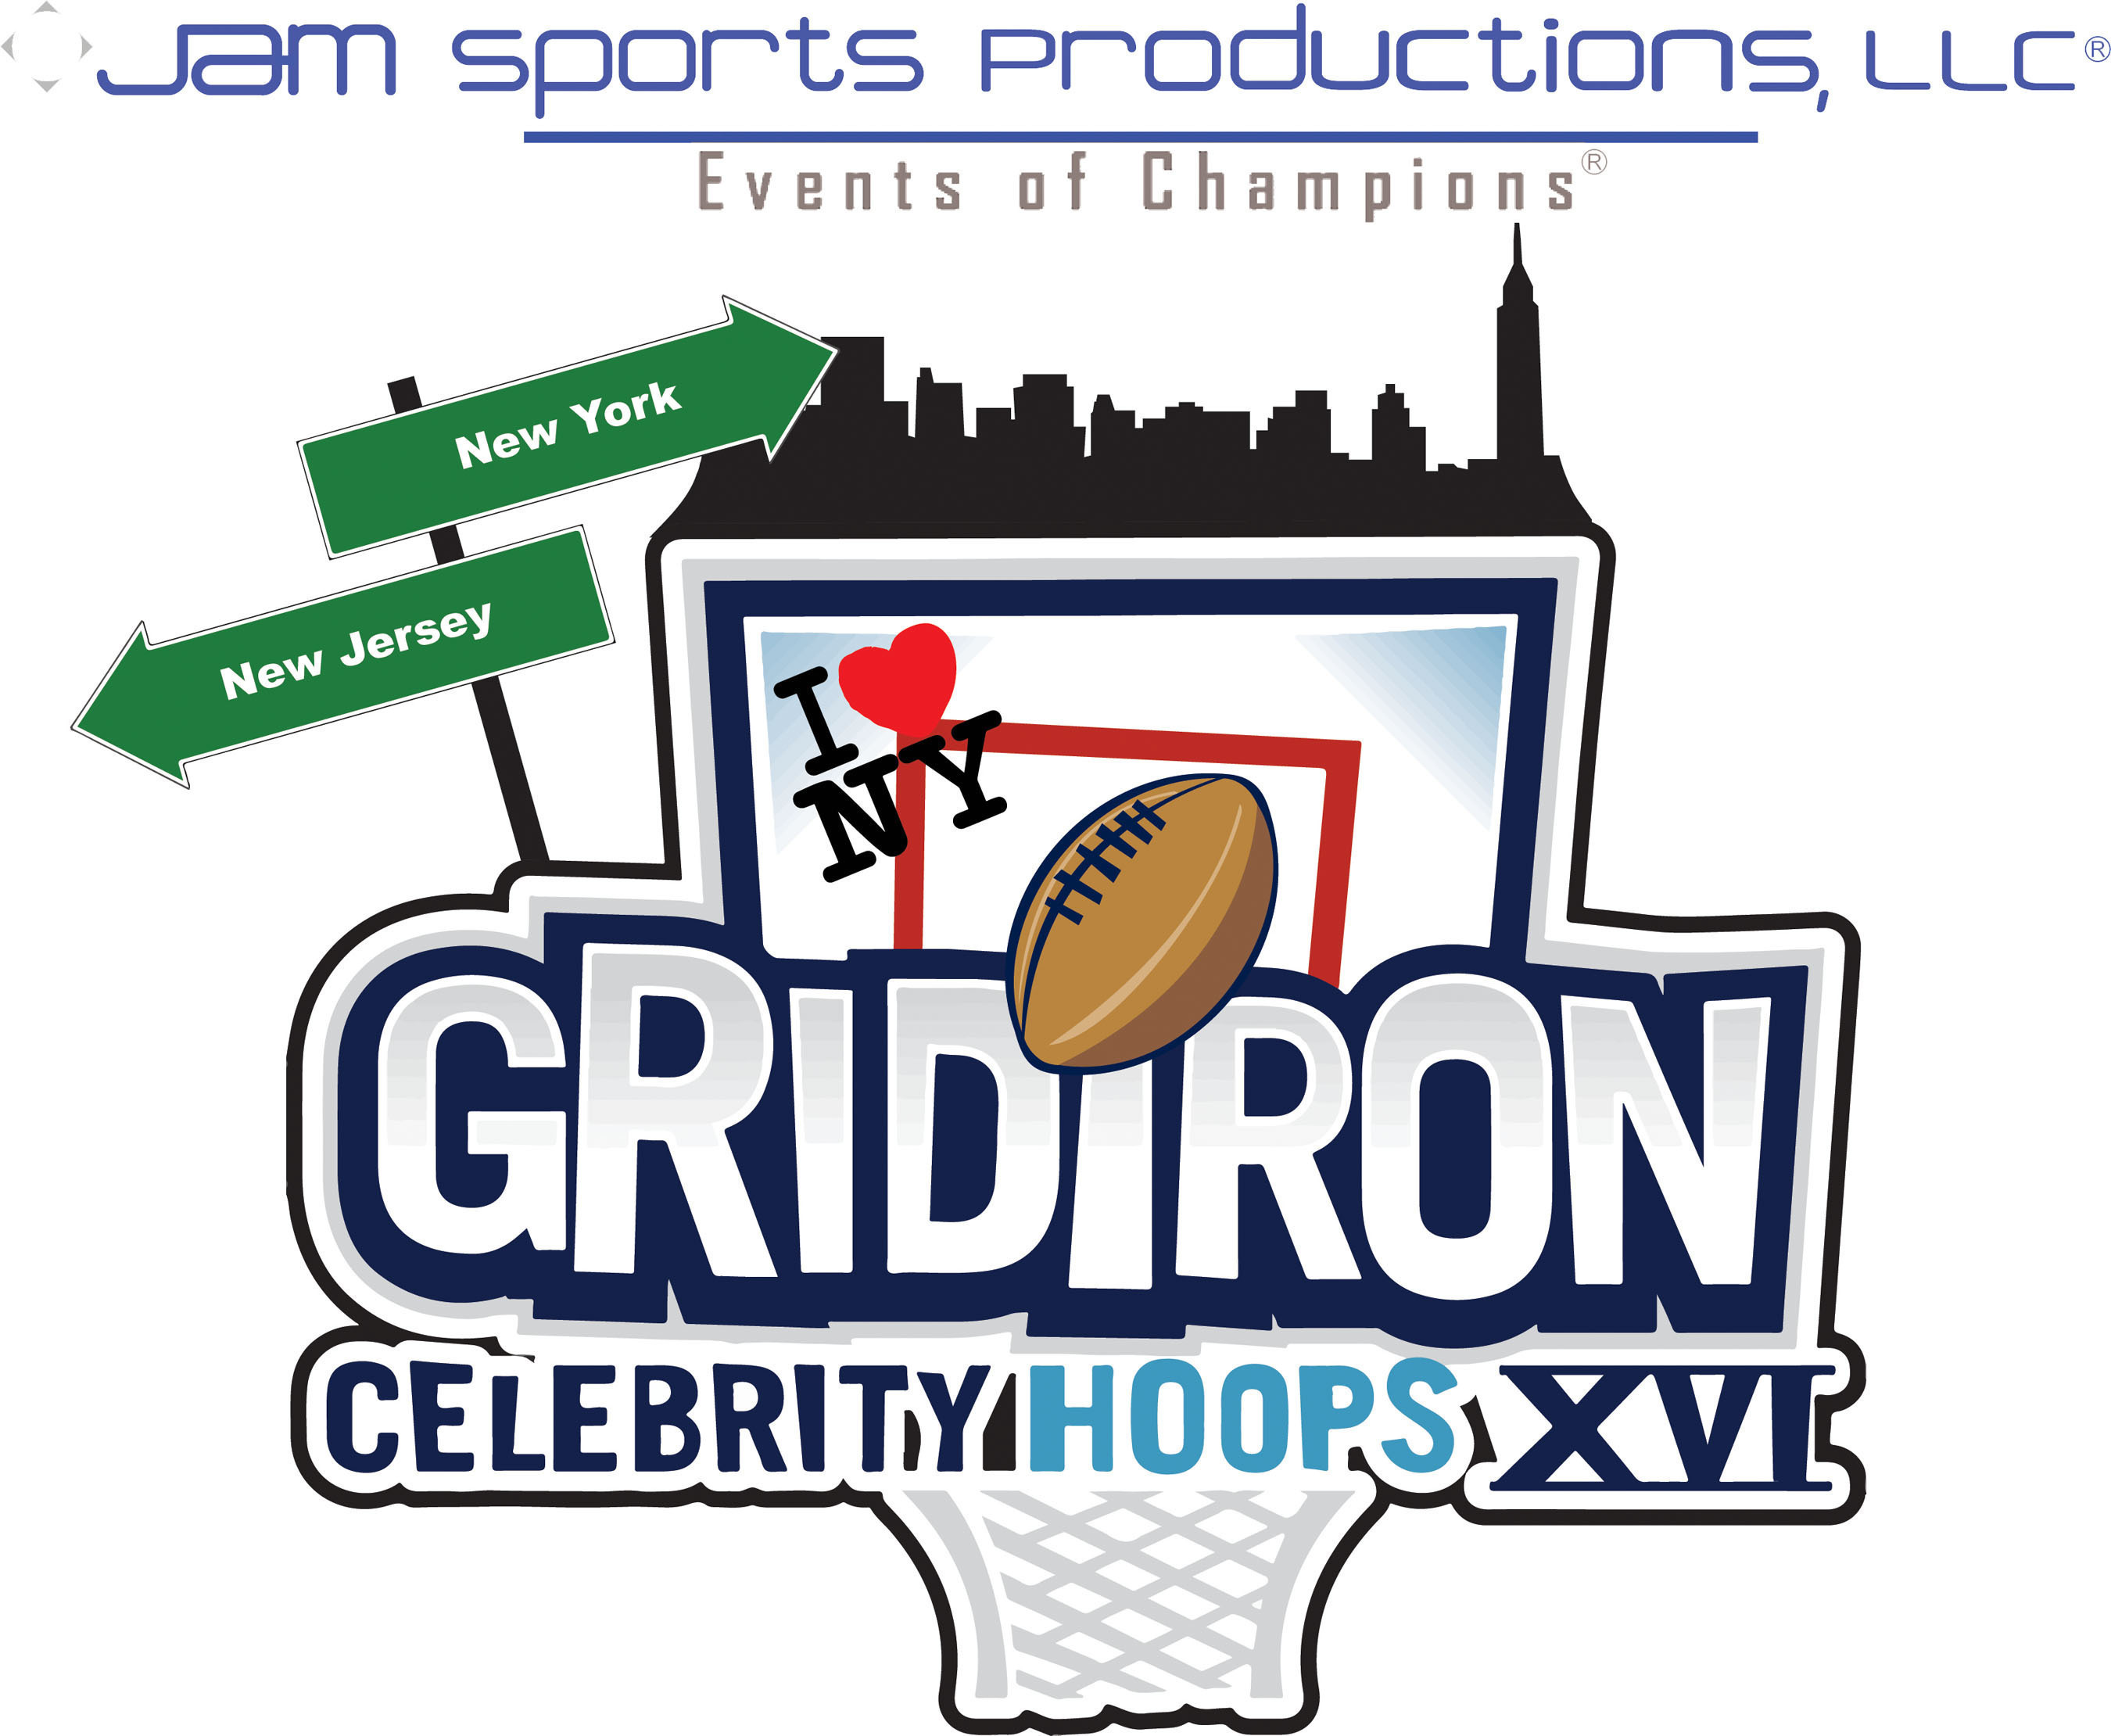 Jam Sports Productions 16th annual charity basketball event Big Game Weekend. Gridiron Celebrity Hoops XVI, to benefit youths in foster care, starring Dez Byrant, Desean Jackson, Terrell Owens and Quinton Coples, presented by my Oh! spot organic healthy foods and beverages. (PRNewsFoto/Jam Sports Productions, LLC) (PRNewsFoto/JAM SPORTS PRODUCTIONS, LLC)